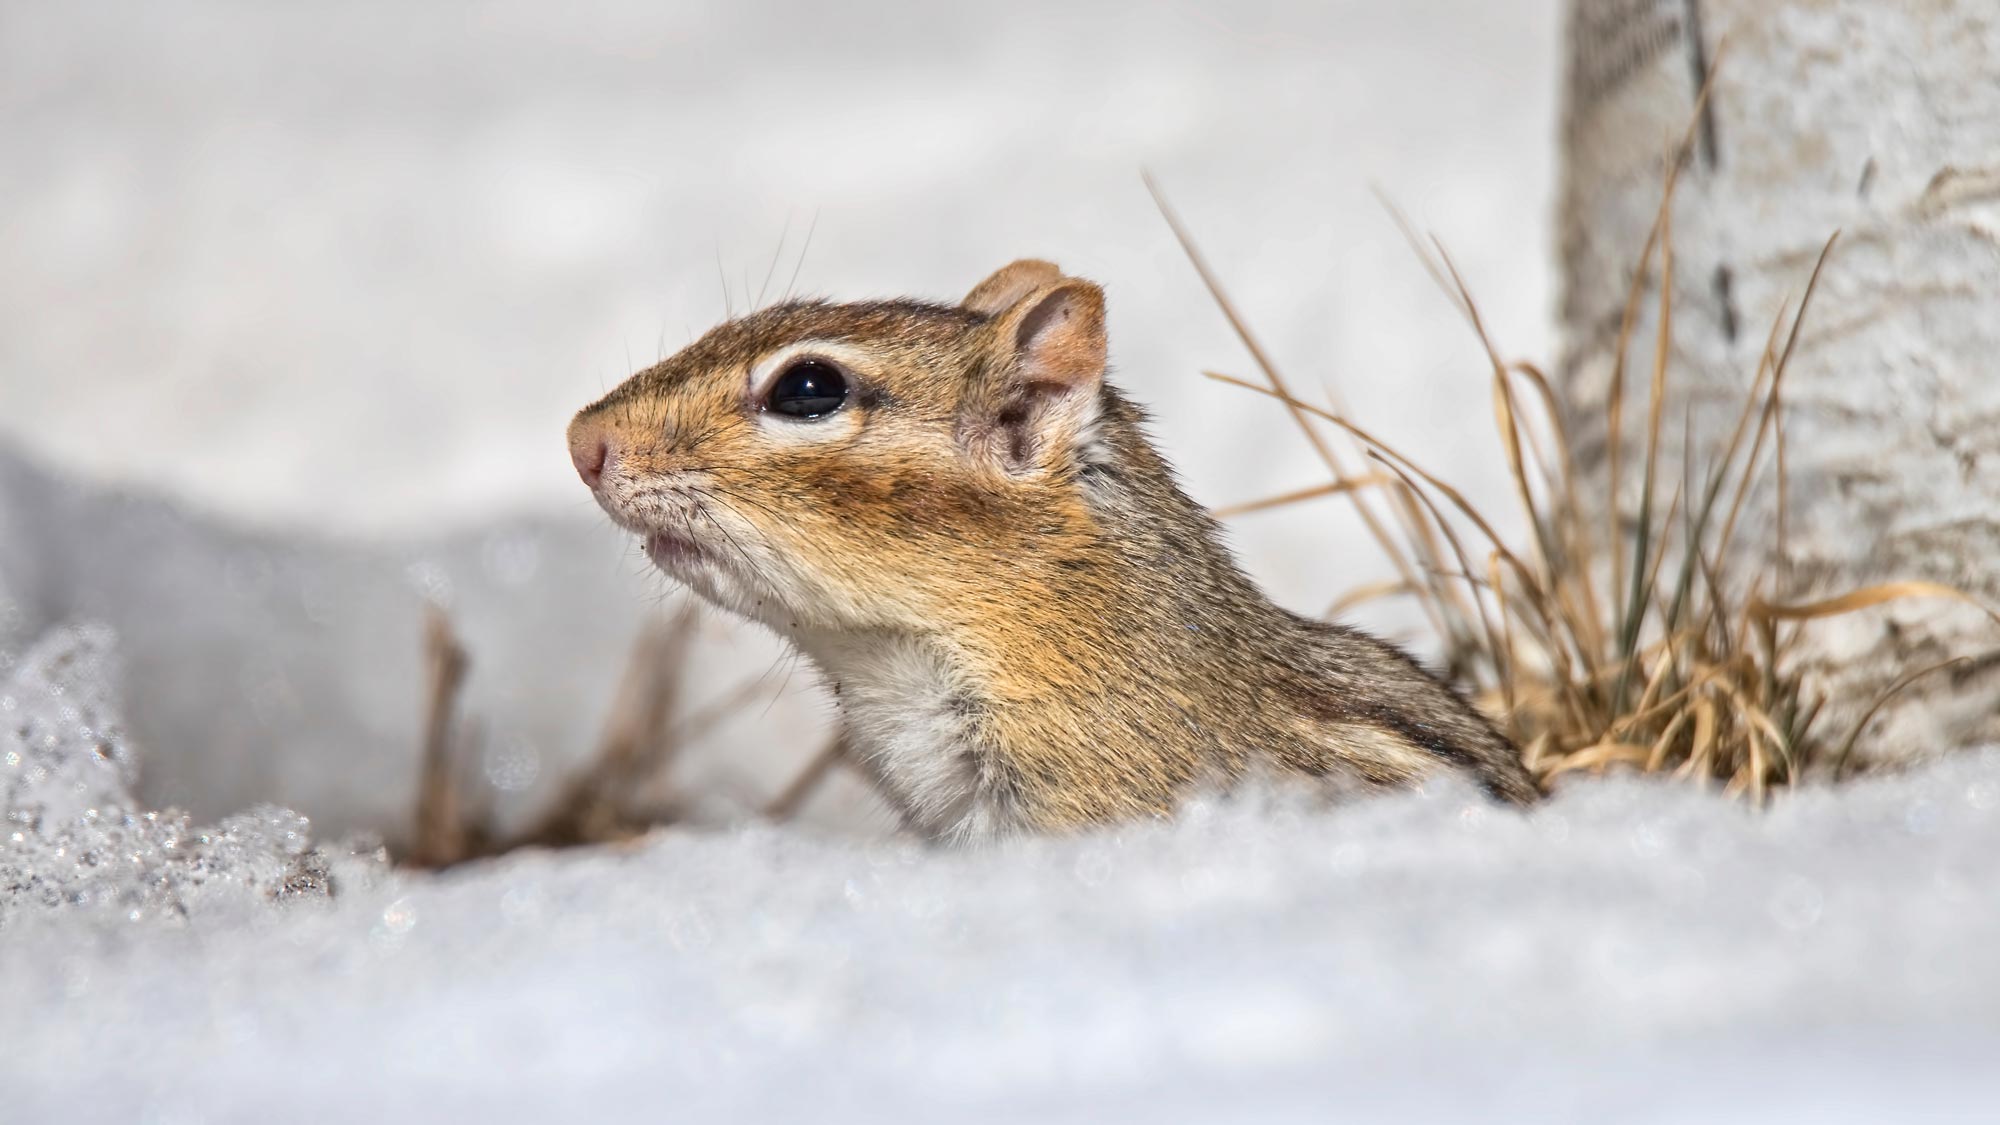 A chipmunk in a snow-covered field.